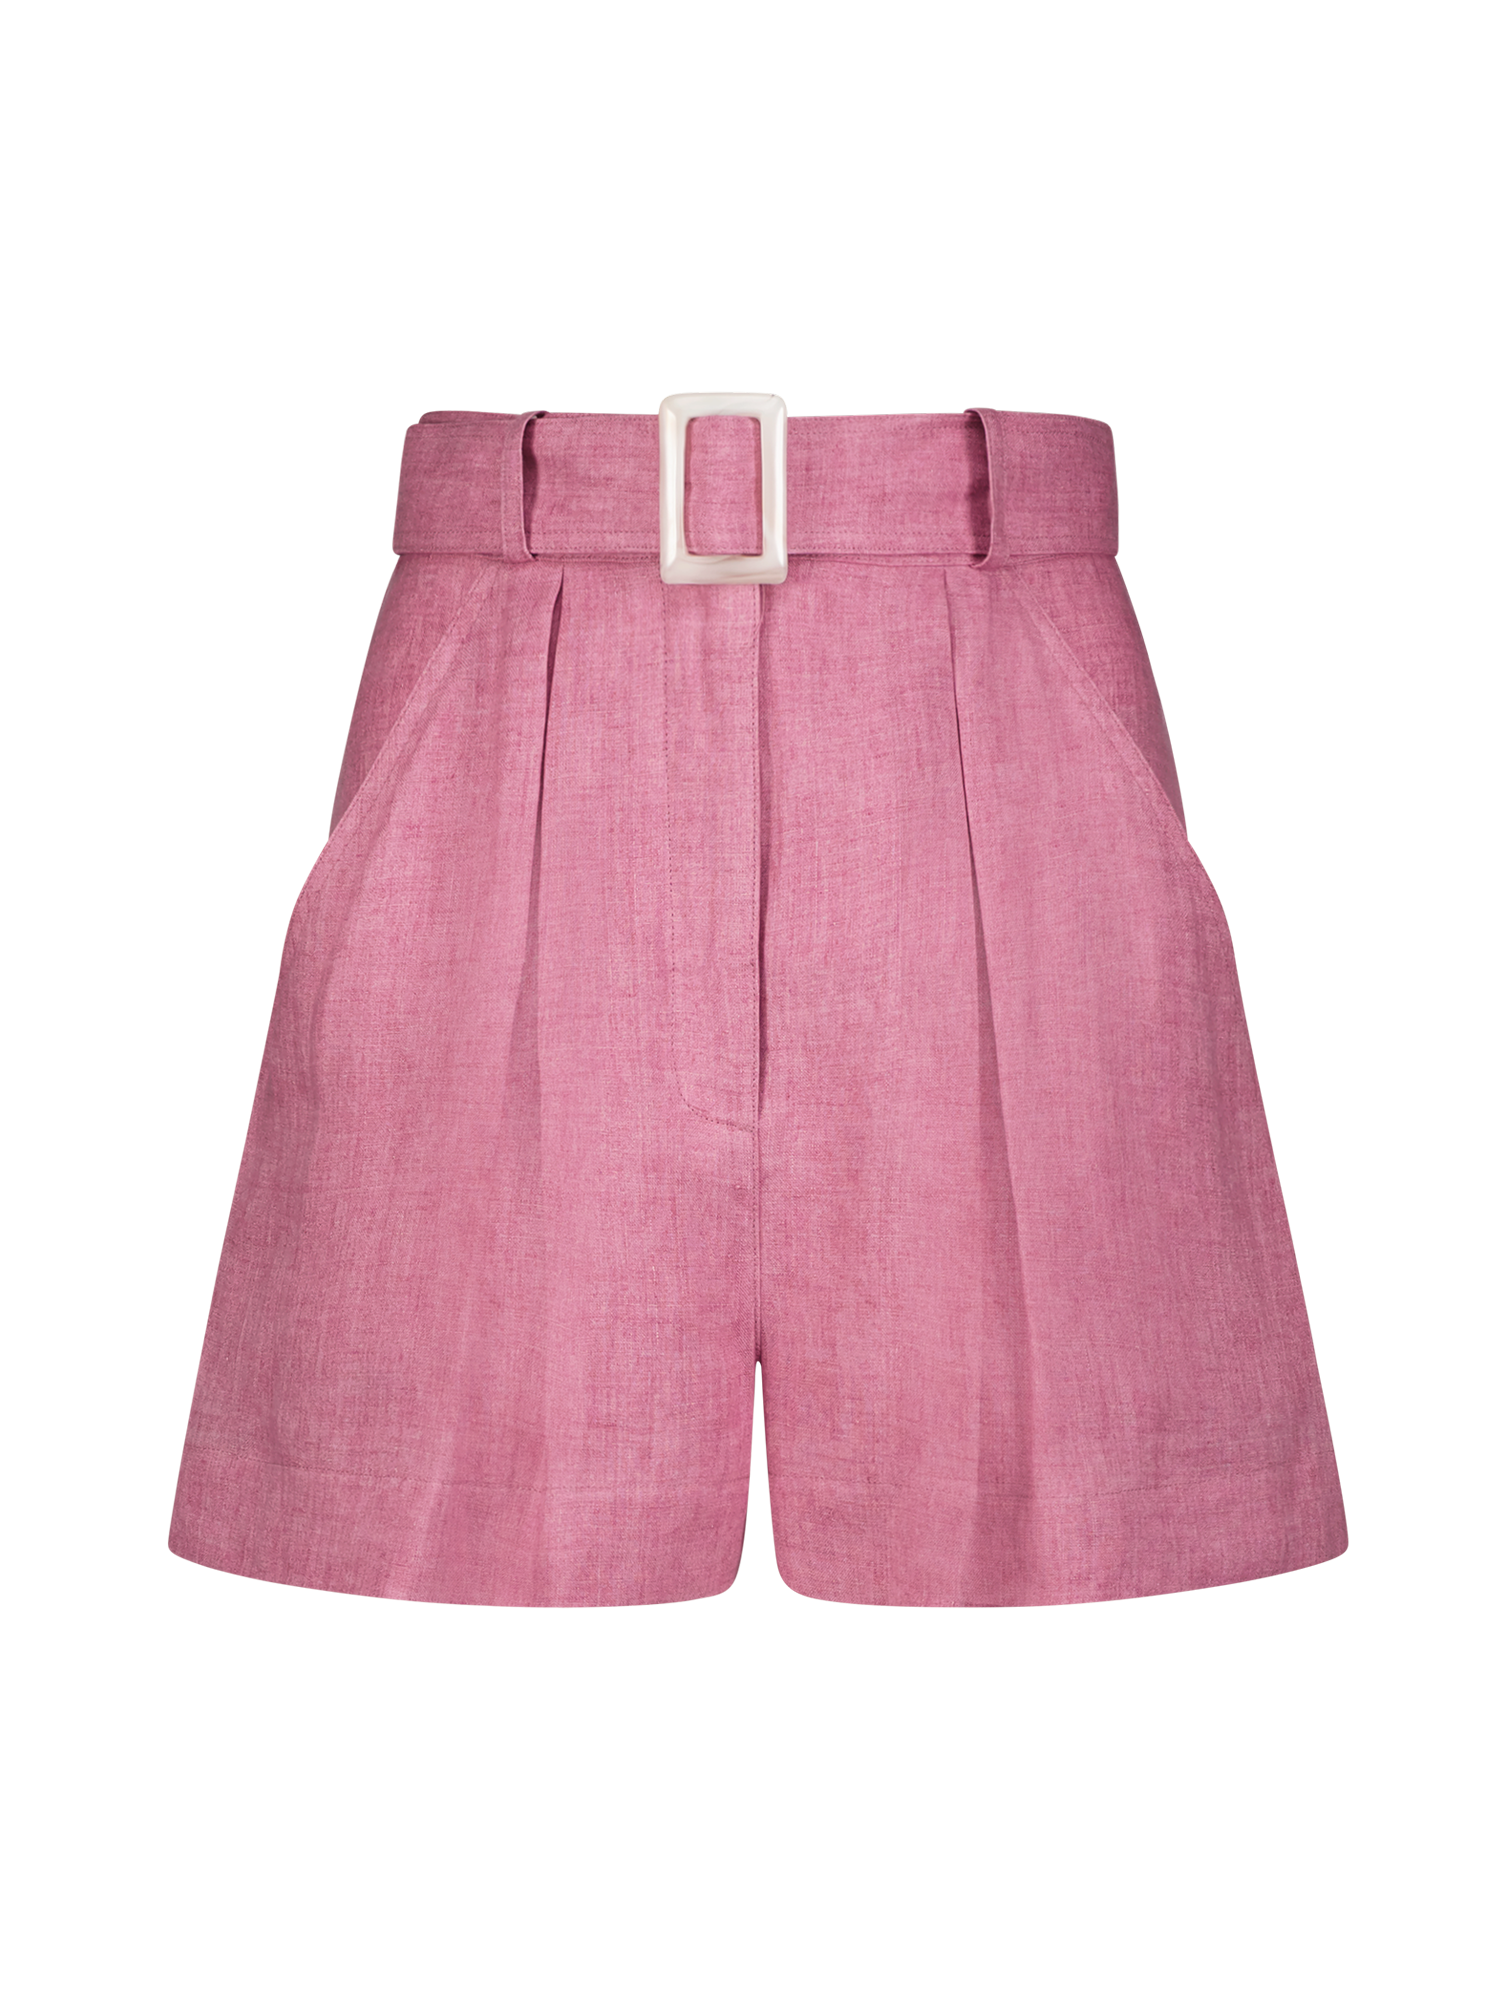 Pleated Orchid Linen Short